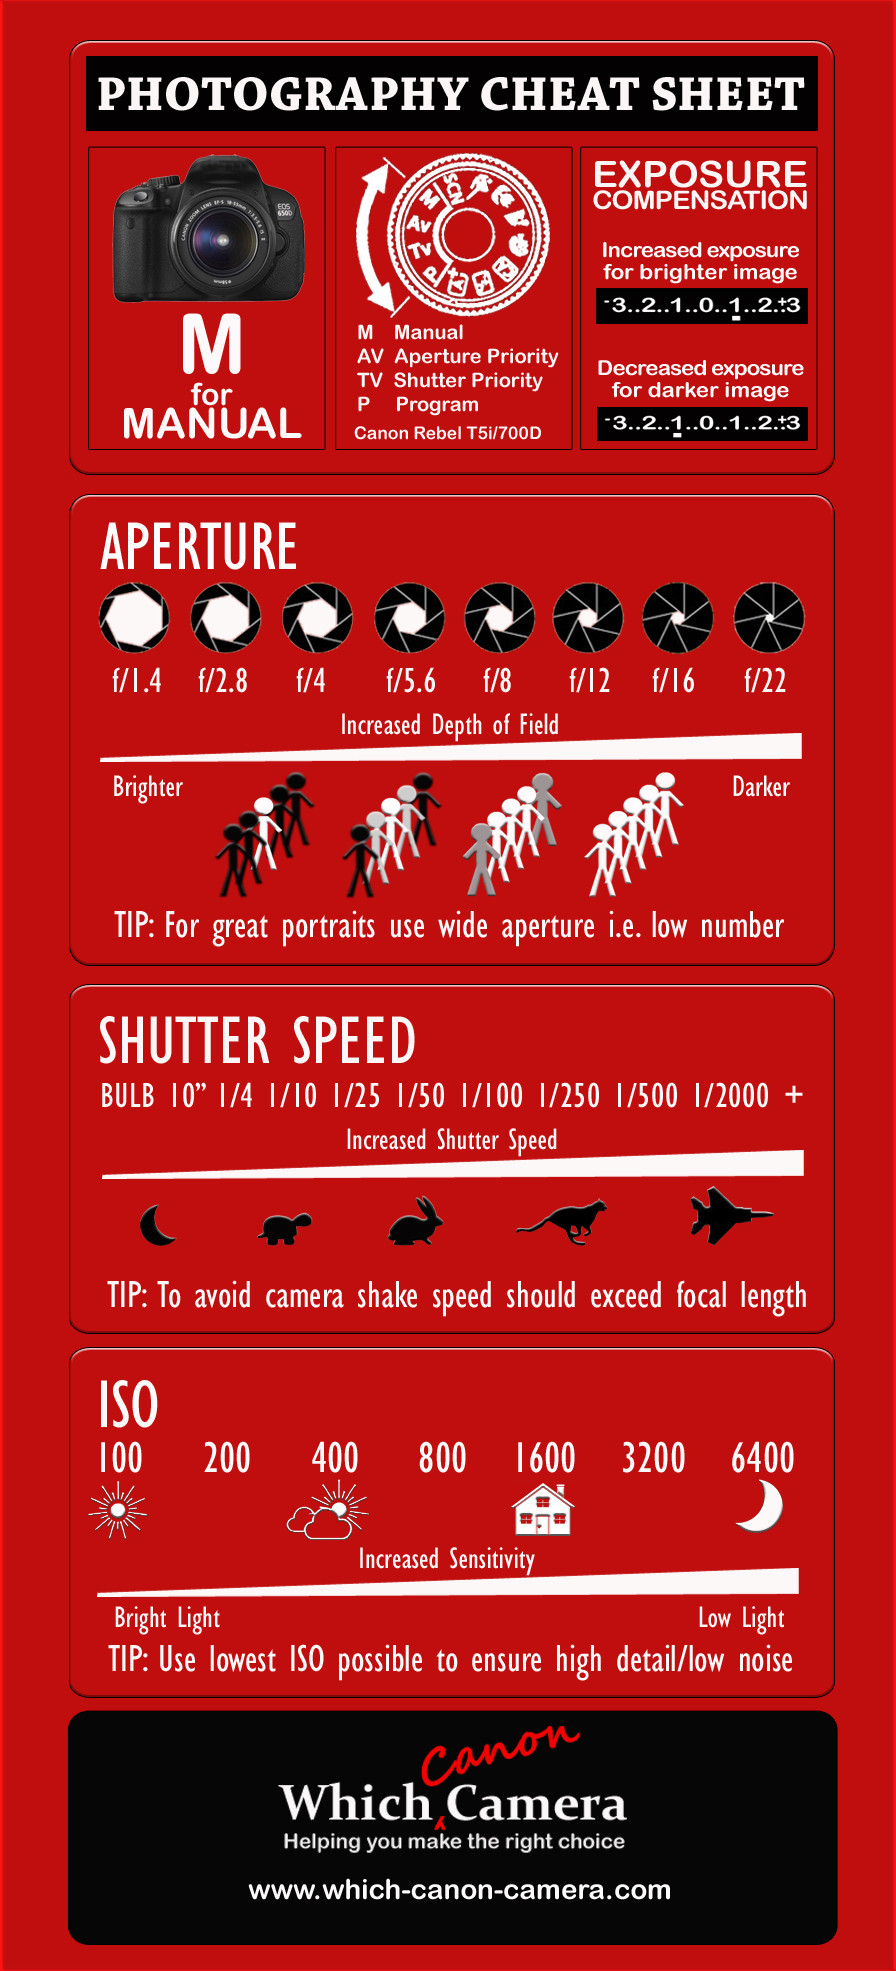 Quick Reference Guide To Manual Photography